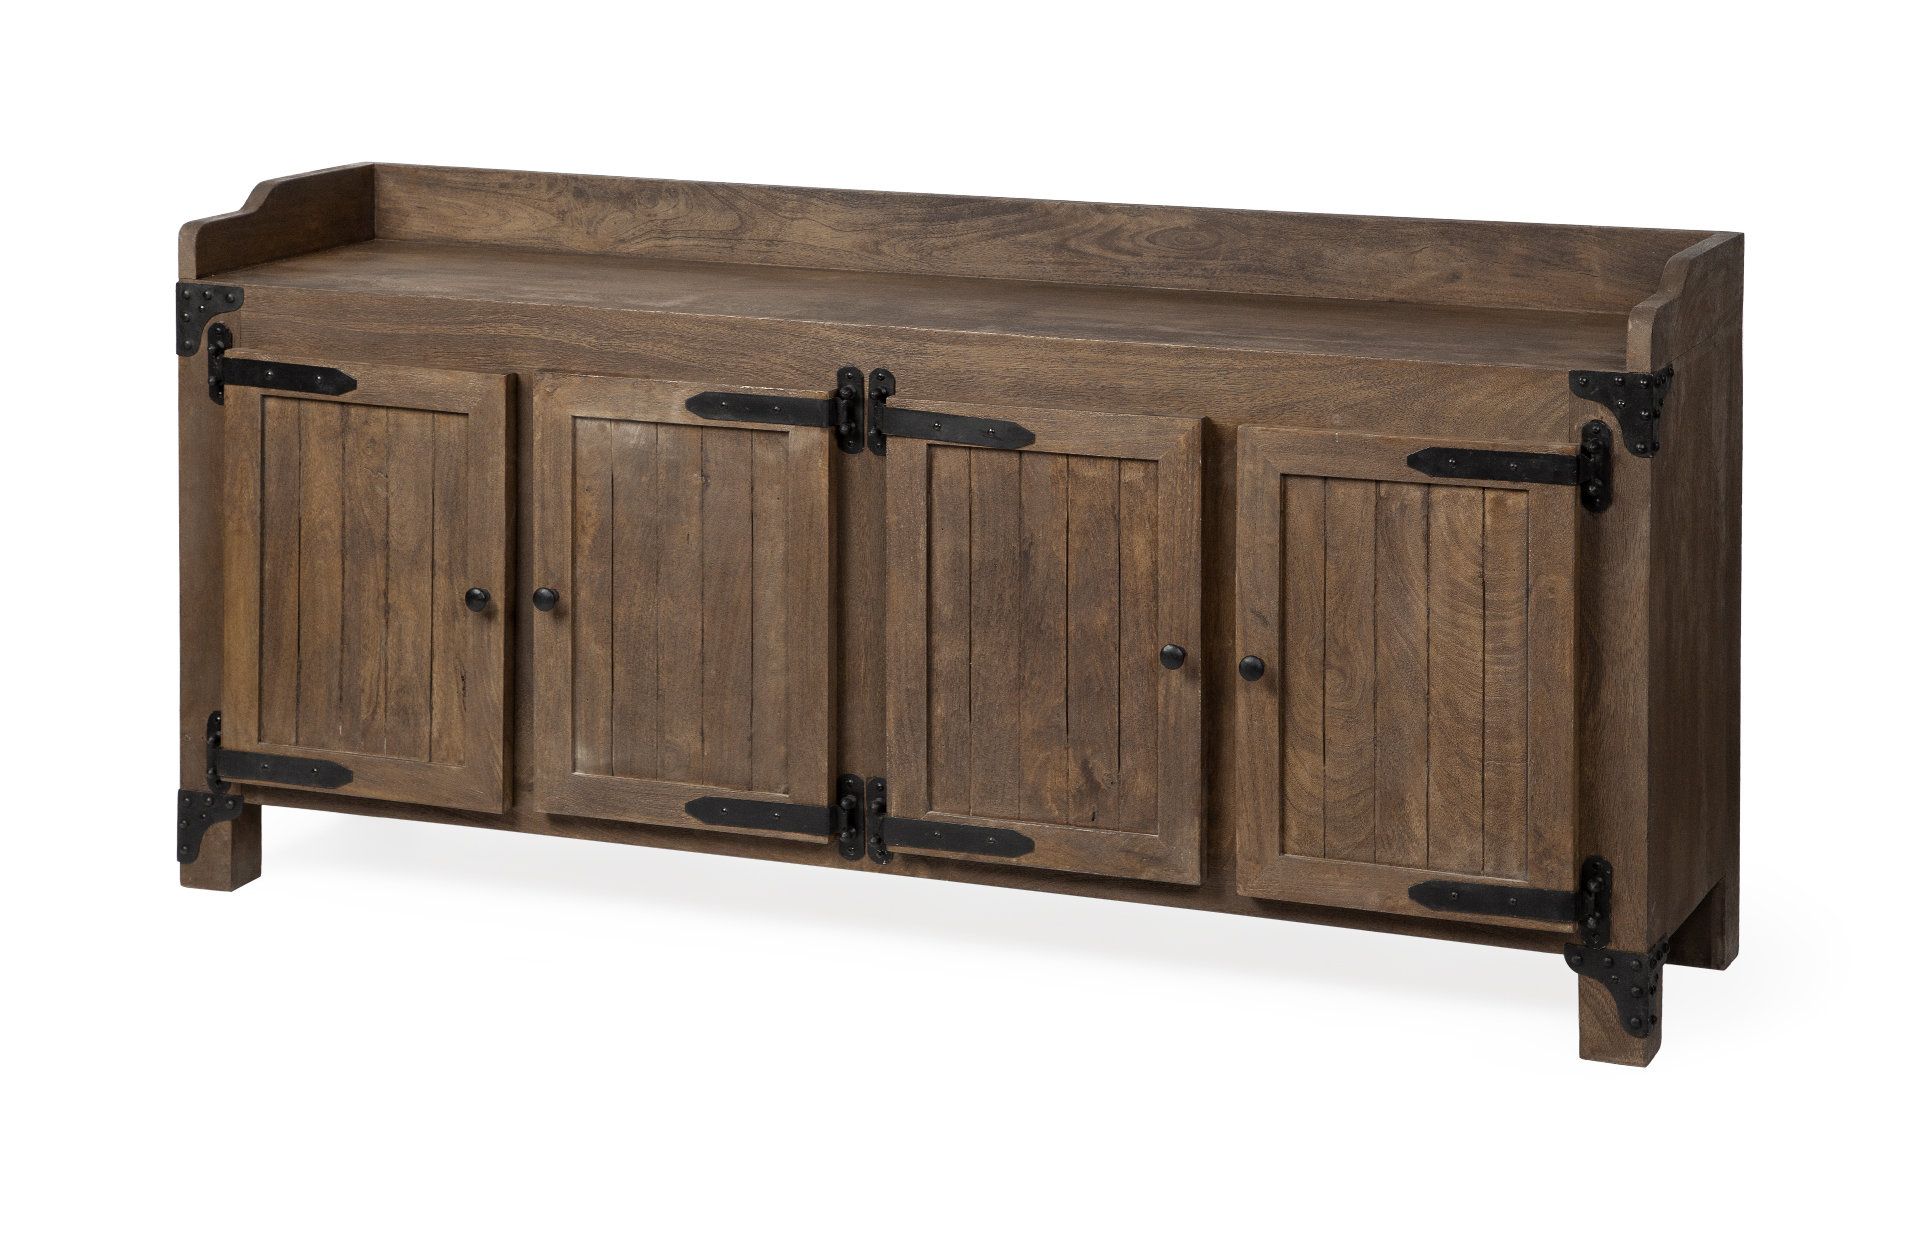 Scurlock Old Crow Sideboard Intended For 2017 Whitten Sideboards (View 8 of 20)